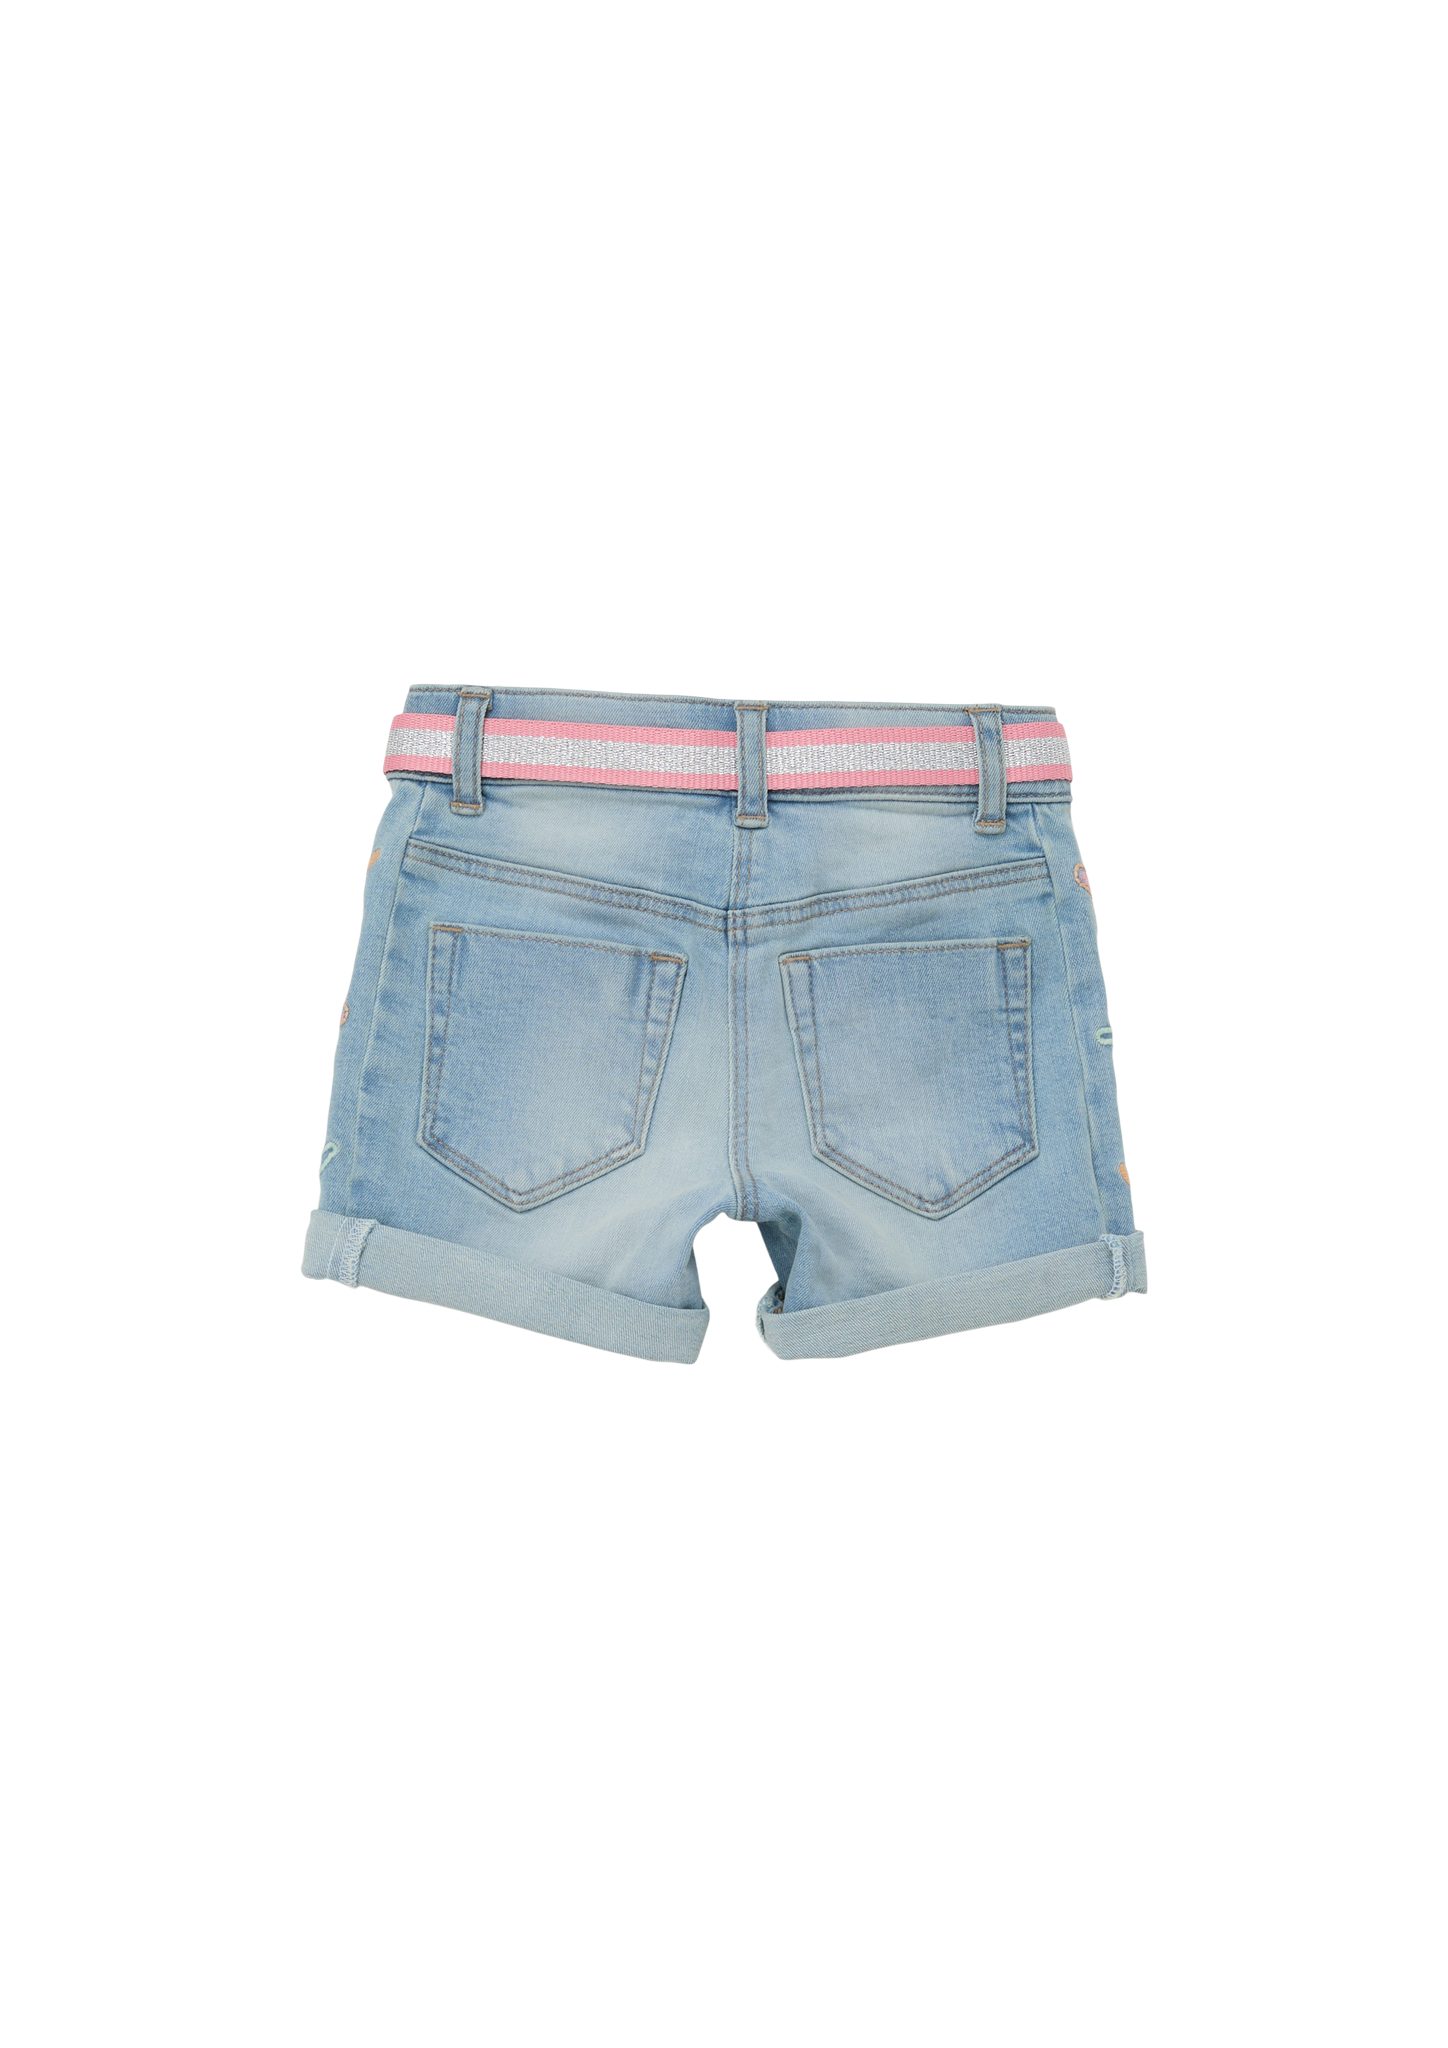 Fit Jeans-Shorts / Regular / s.Oliver Jeansshorts Rise Waschung Stickerei, / Straight Mid Leg